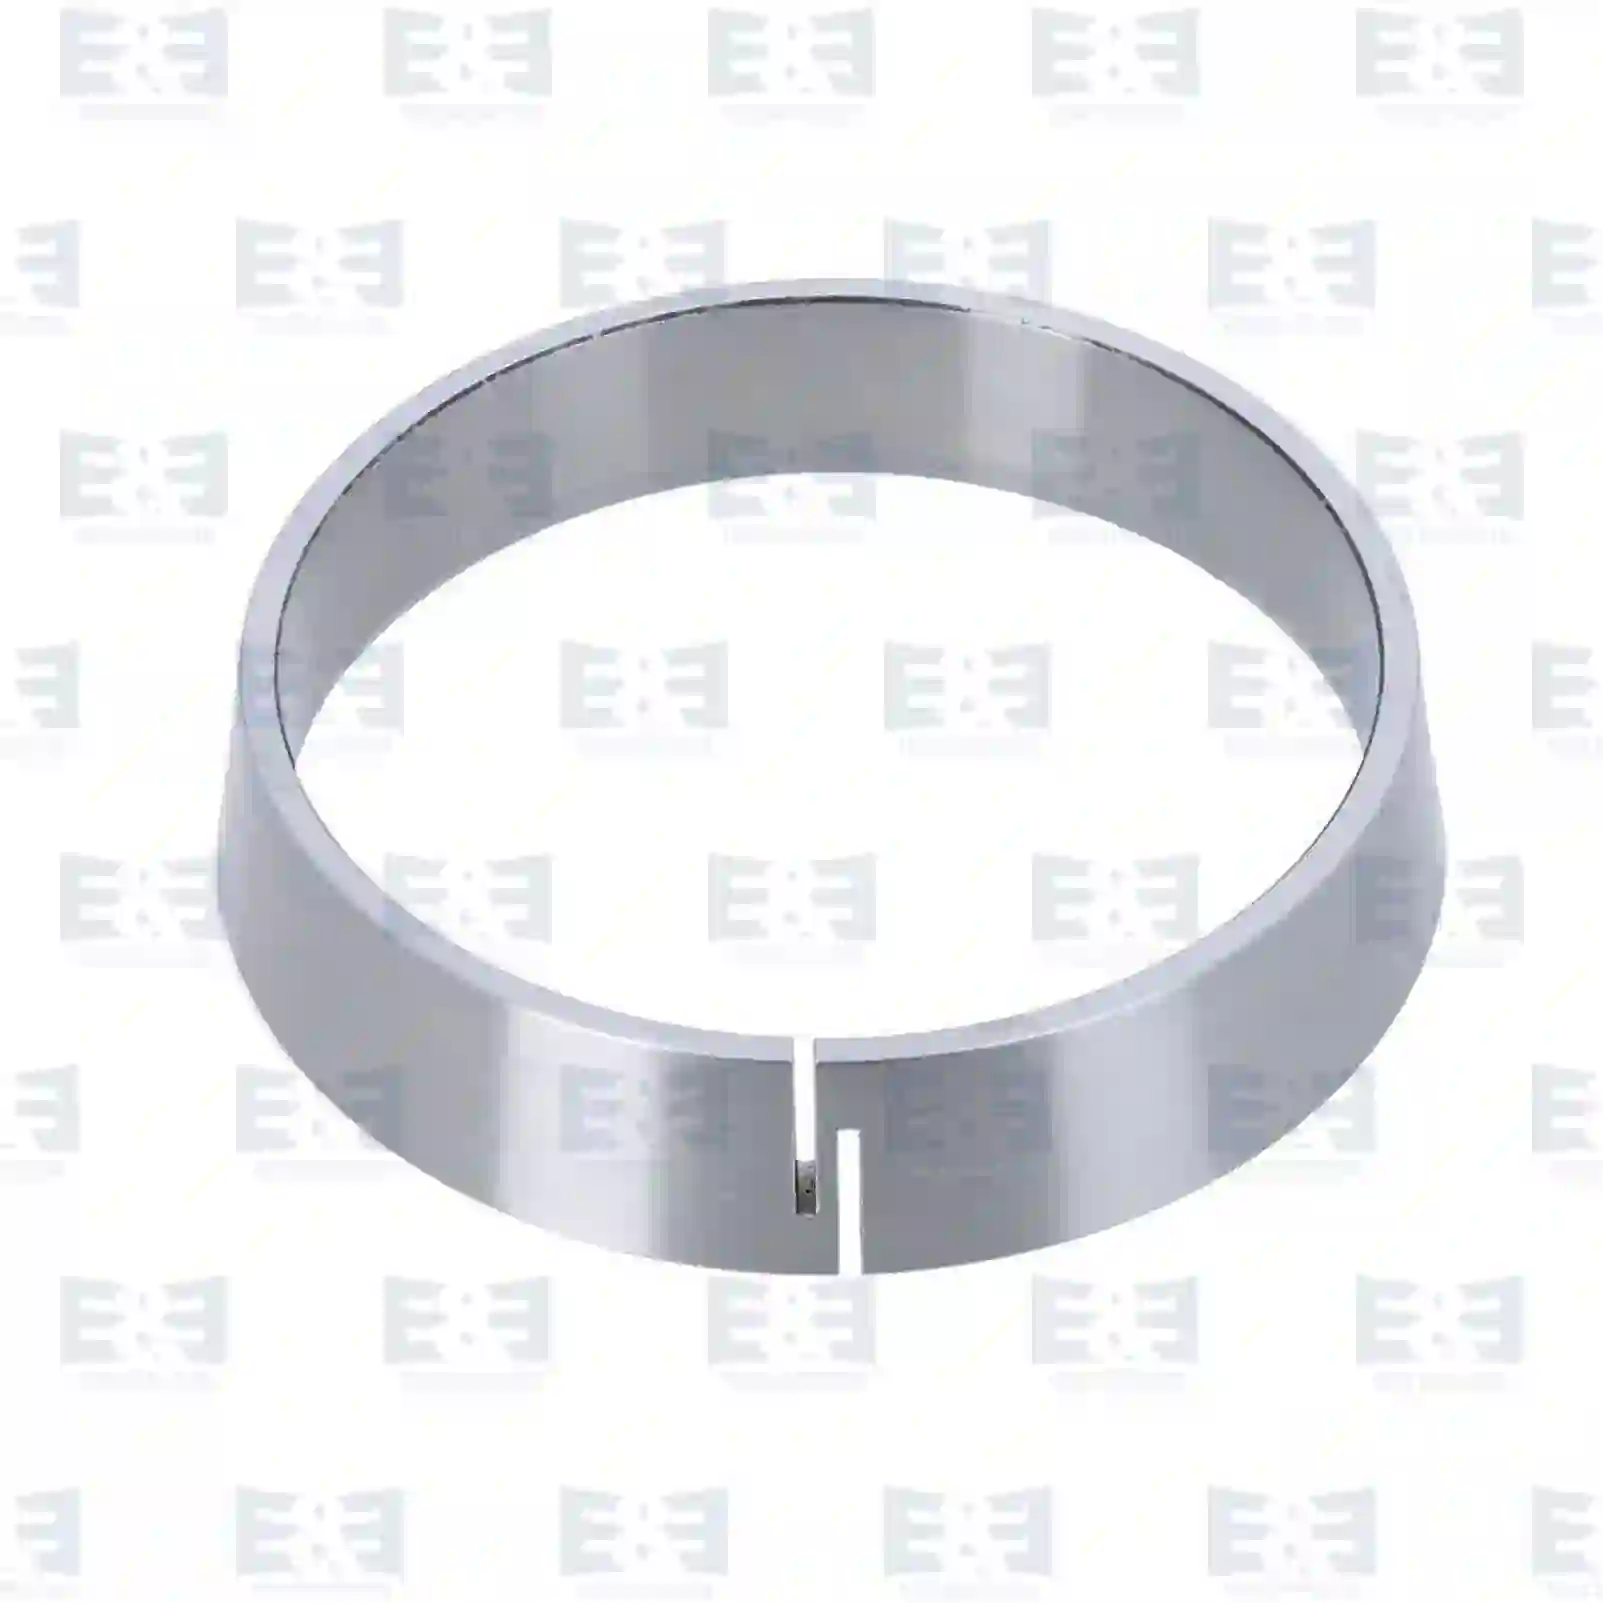  Clamping ring || E&E Truck Spare Parts | Truck Spare Parts, Auotomotive Spare Parts